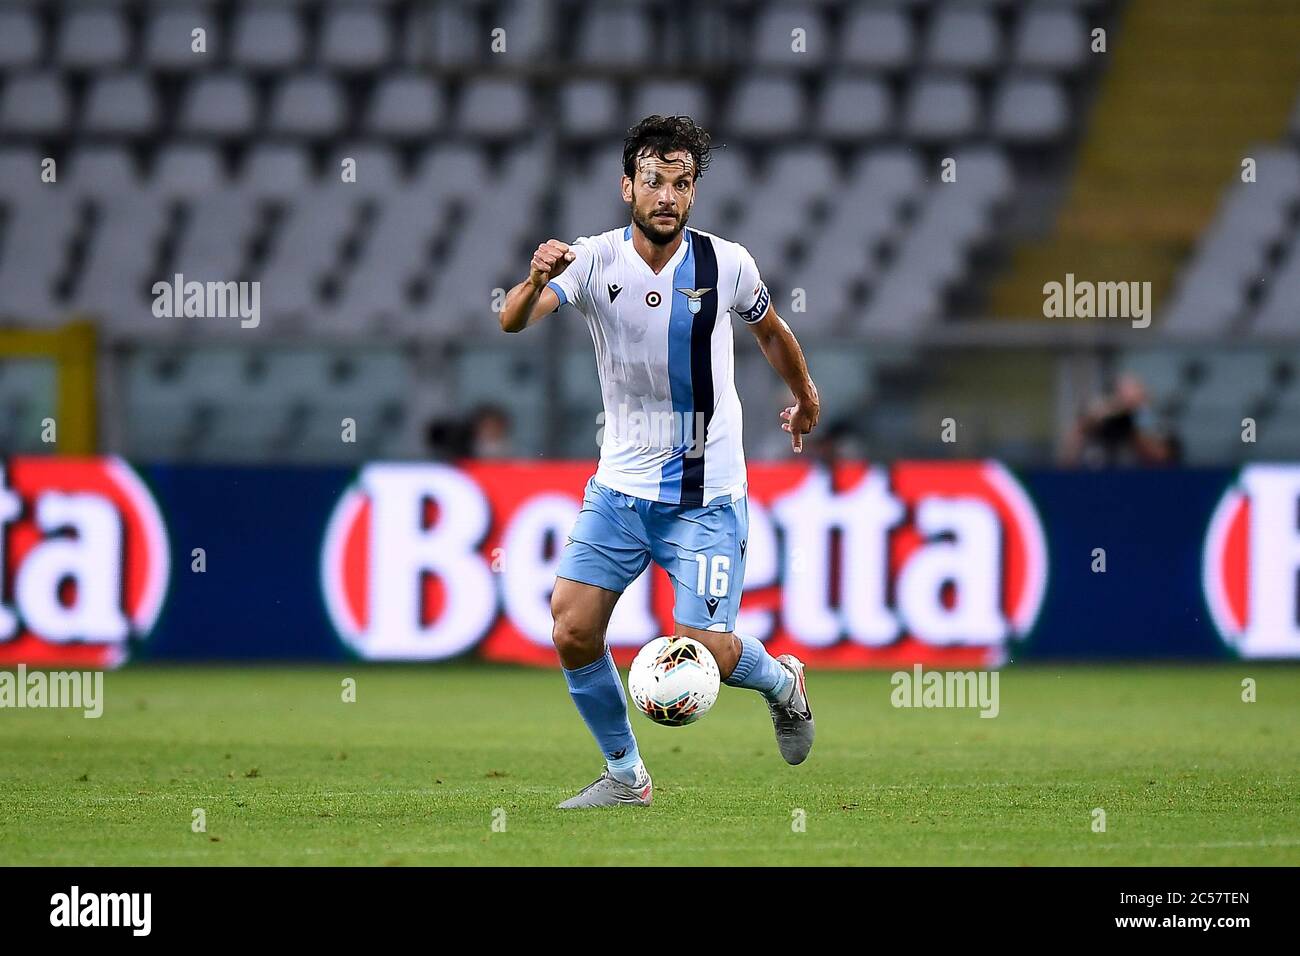 Turin, Italy - 30 June, 2020: Marco Parolo of SS Lazio in action during the Serie A football match between Torino FC and SS Lazio. SS Lazio won 2-1 over Torino FC. Credit: Nicolò Campo/Alamy Live News Stock Photo